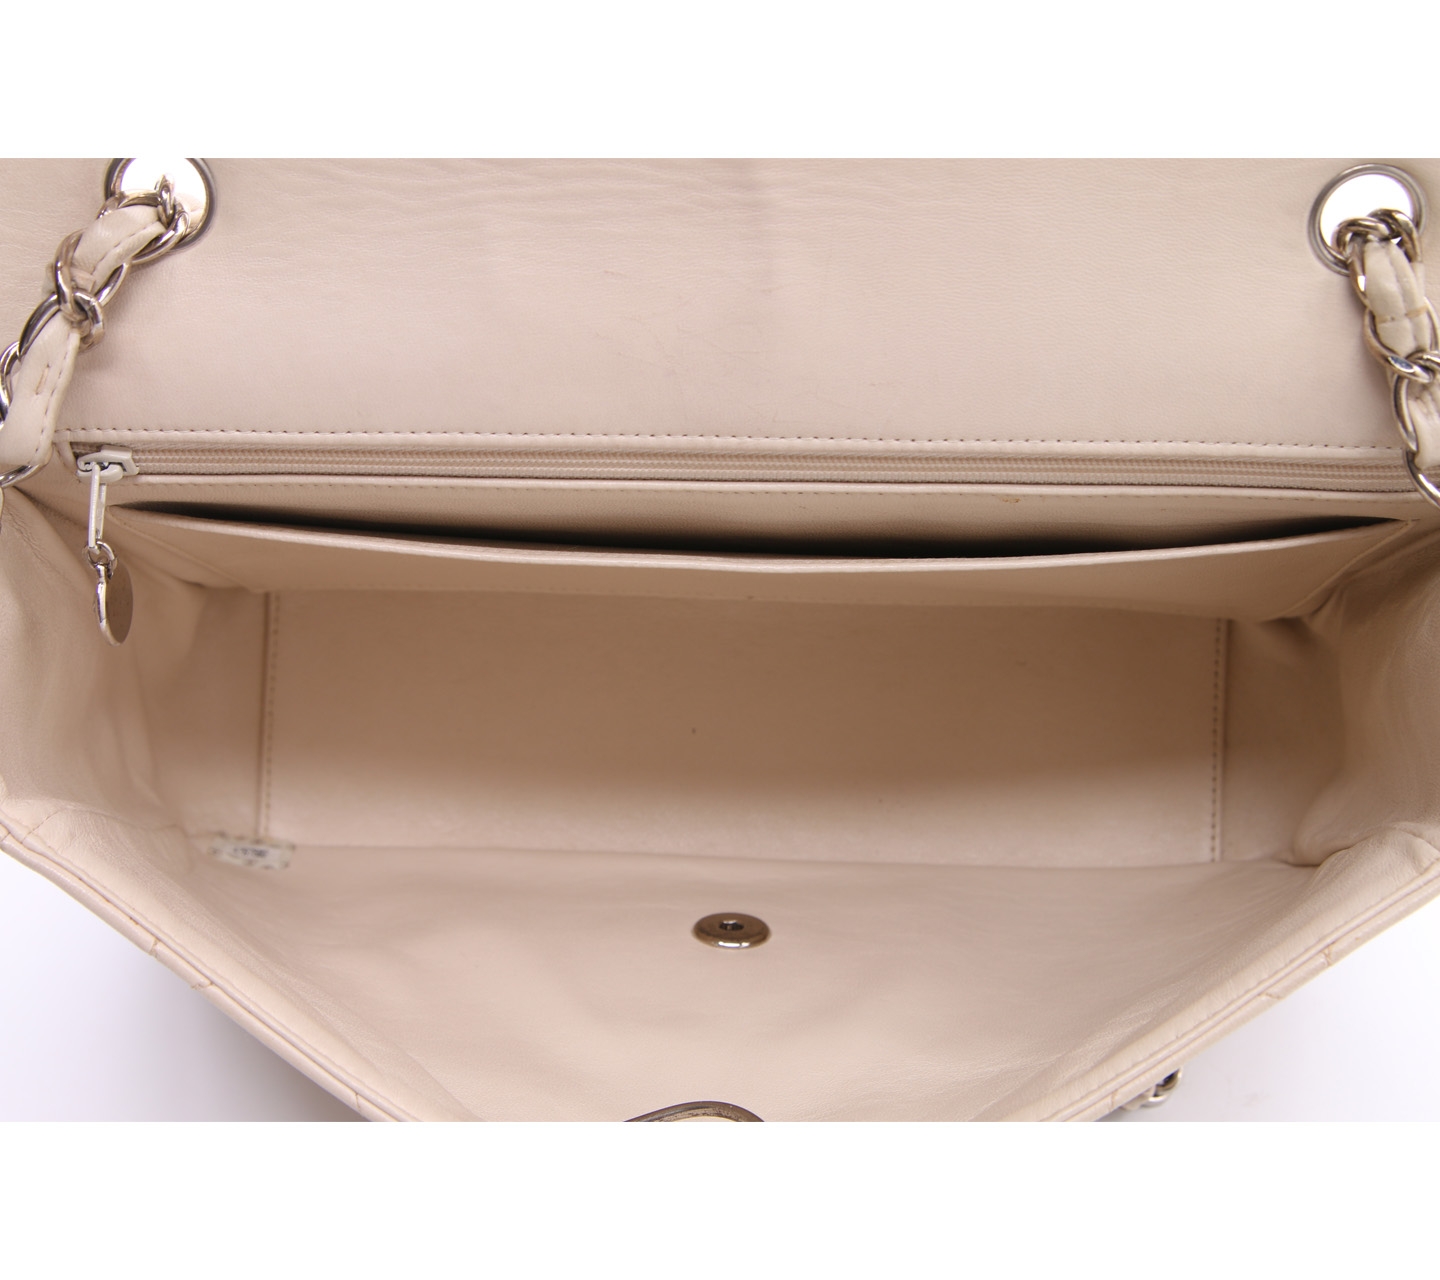 Chanel Nude Diana GHW Sling Bag